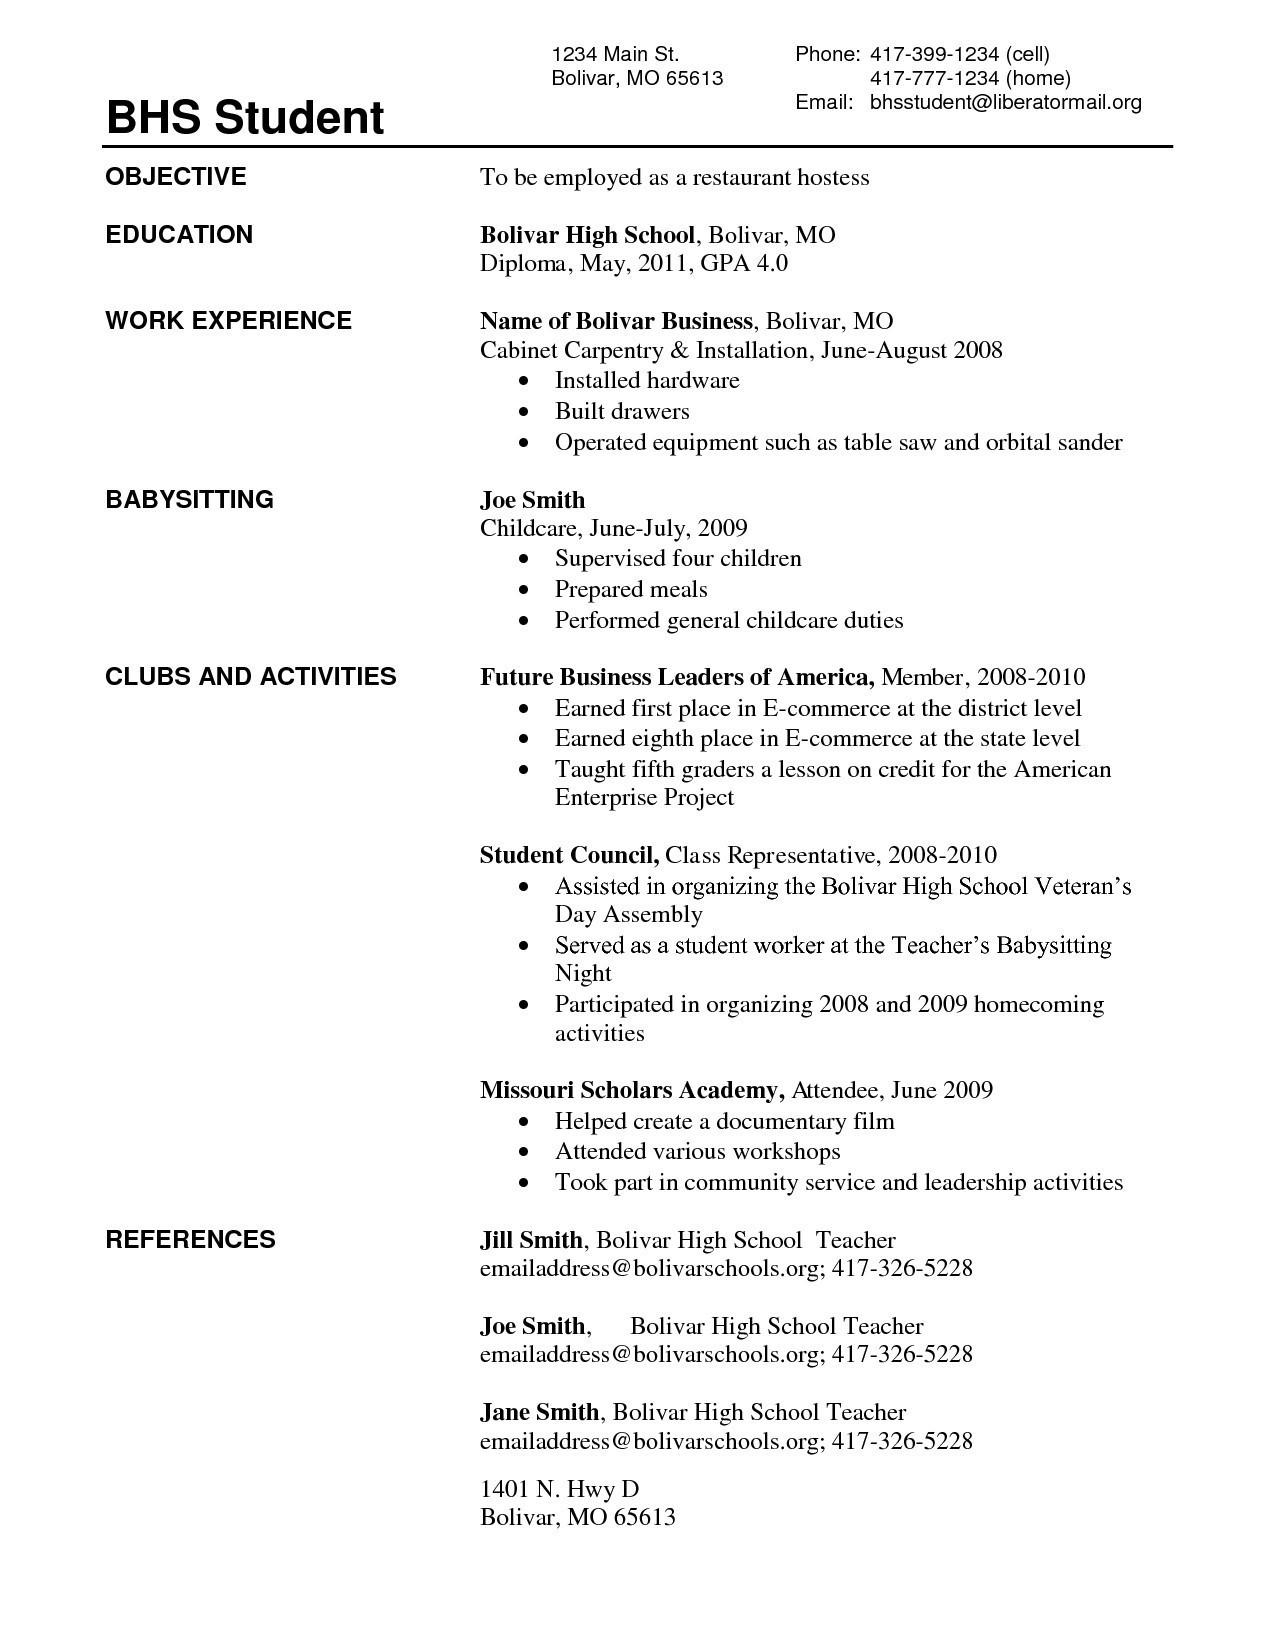 Student Resume Template High School Student Resume Template No Experience Best Resume